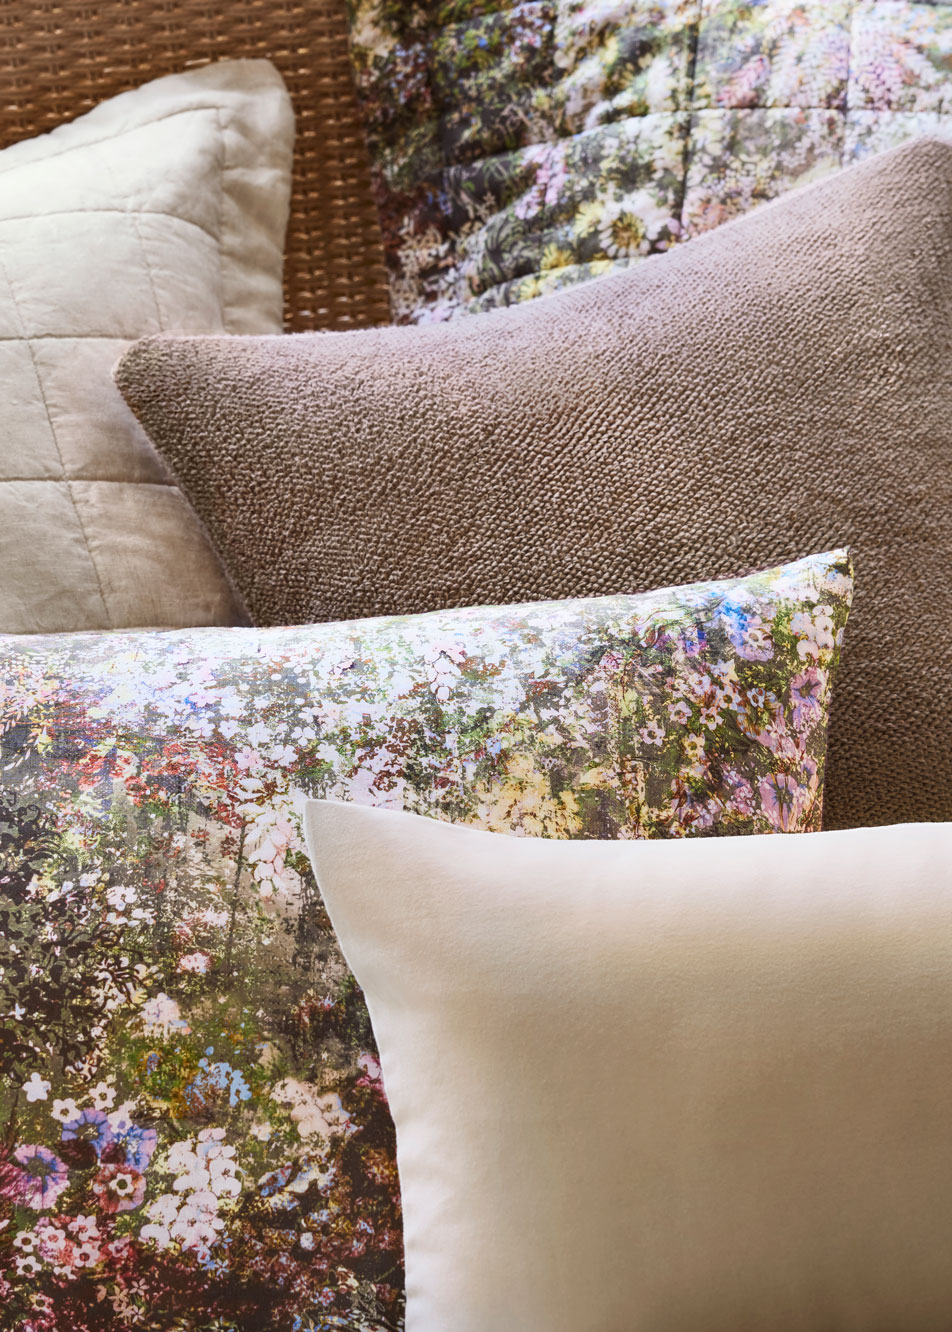 A close-up of layers of cushions styled on a bed